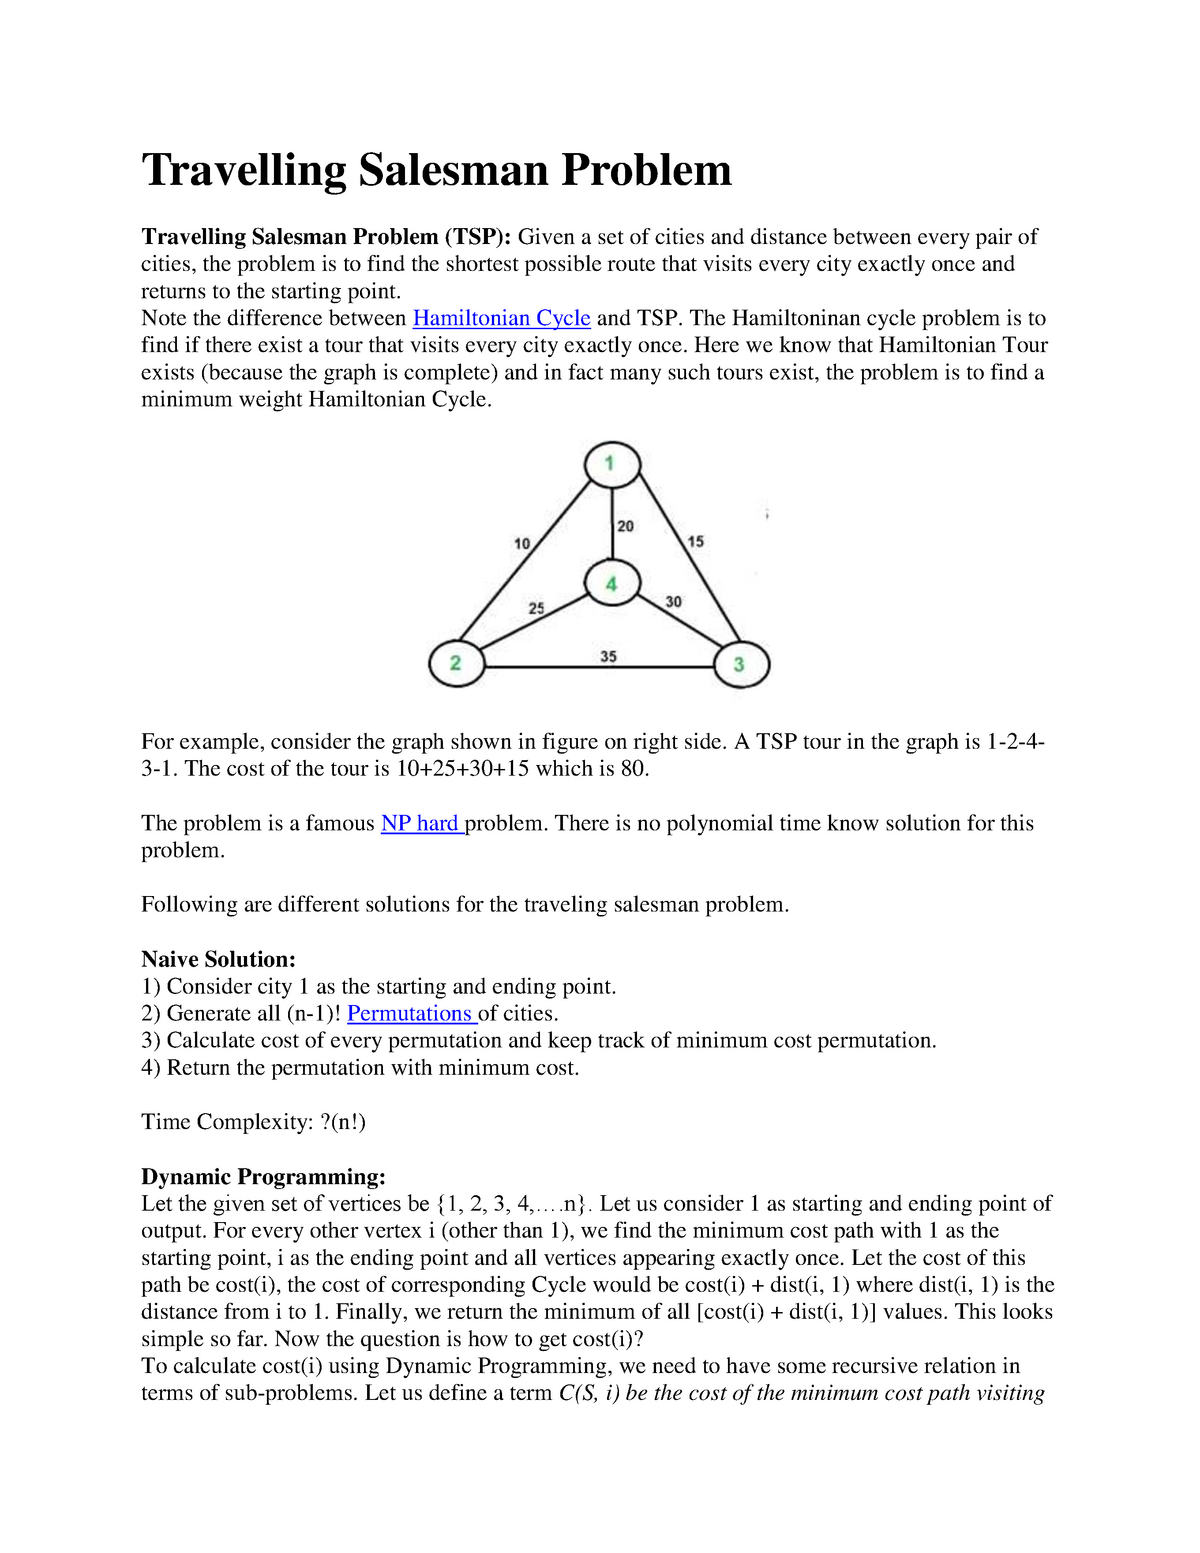 travelling salesman problem in assignment problem